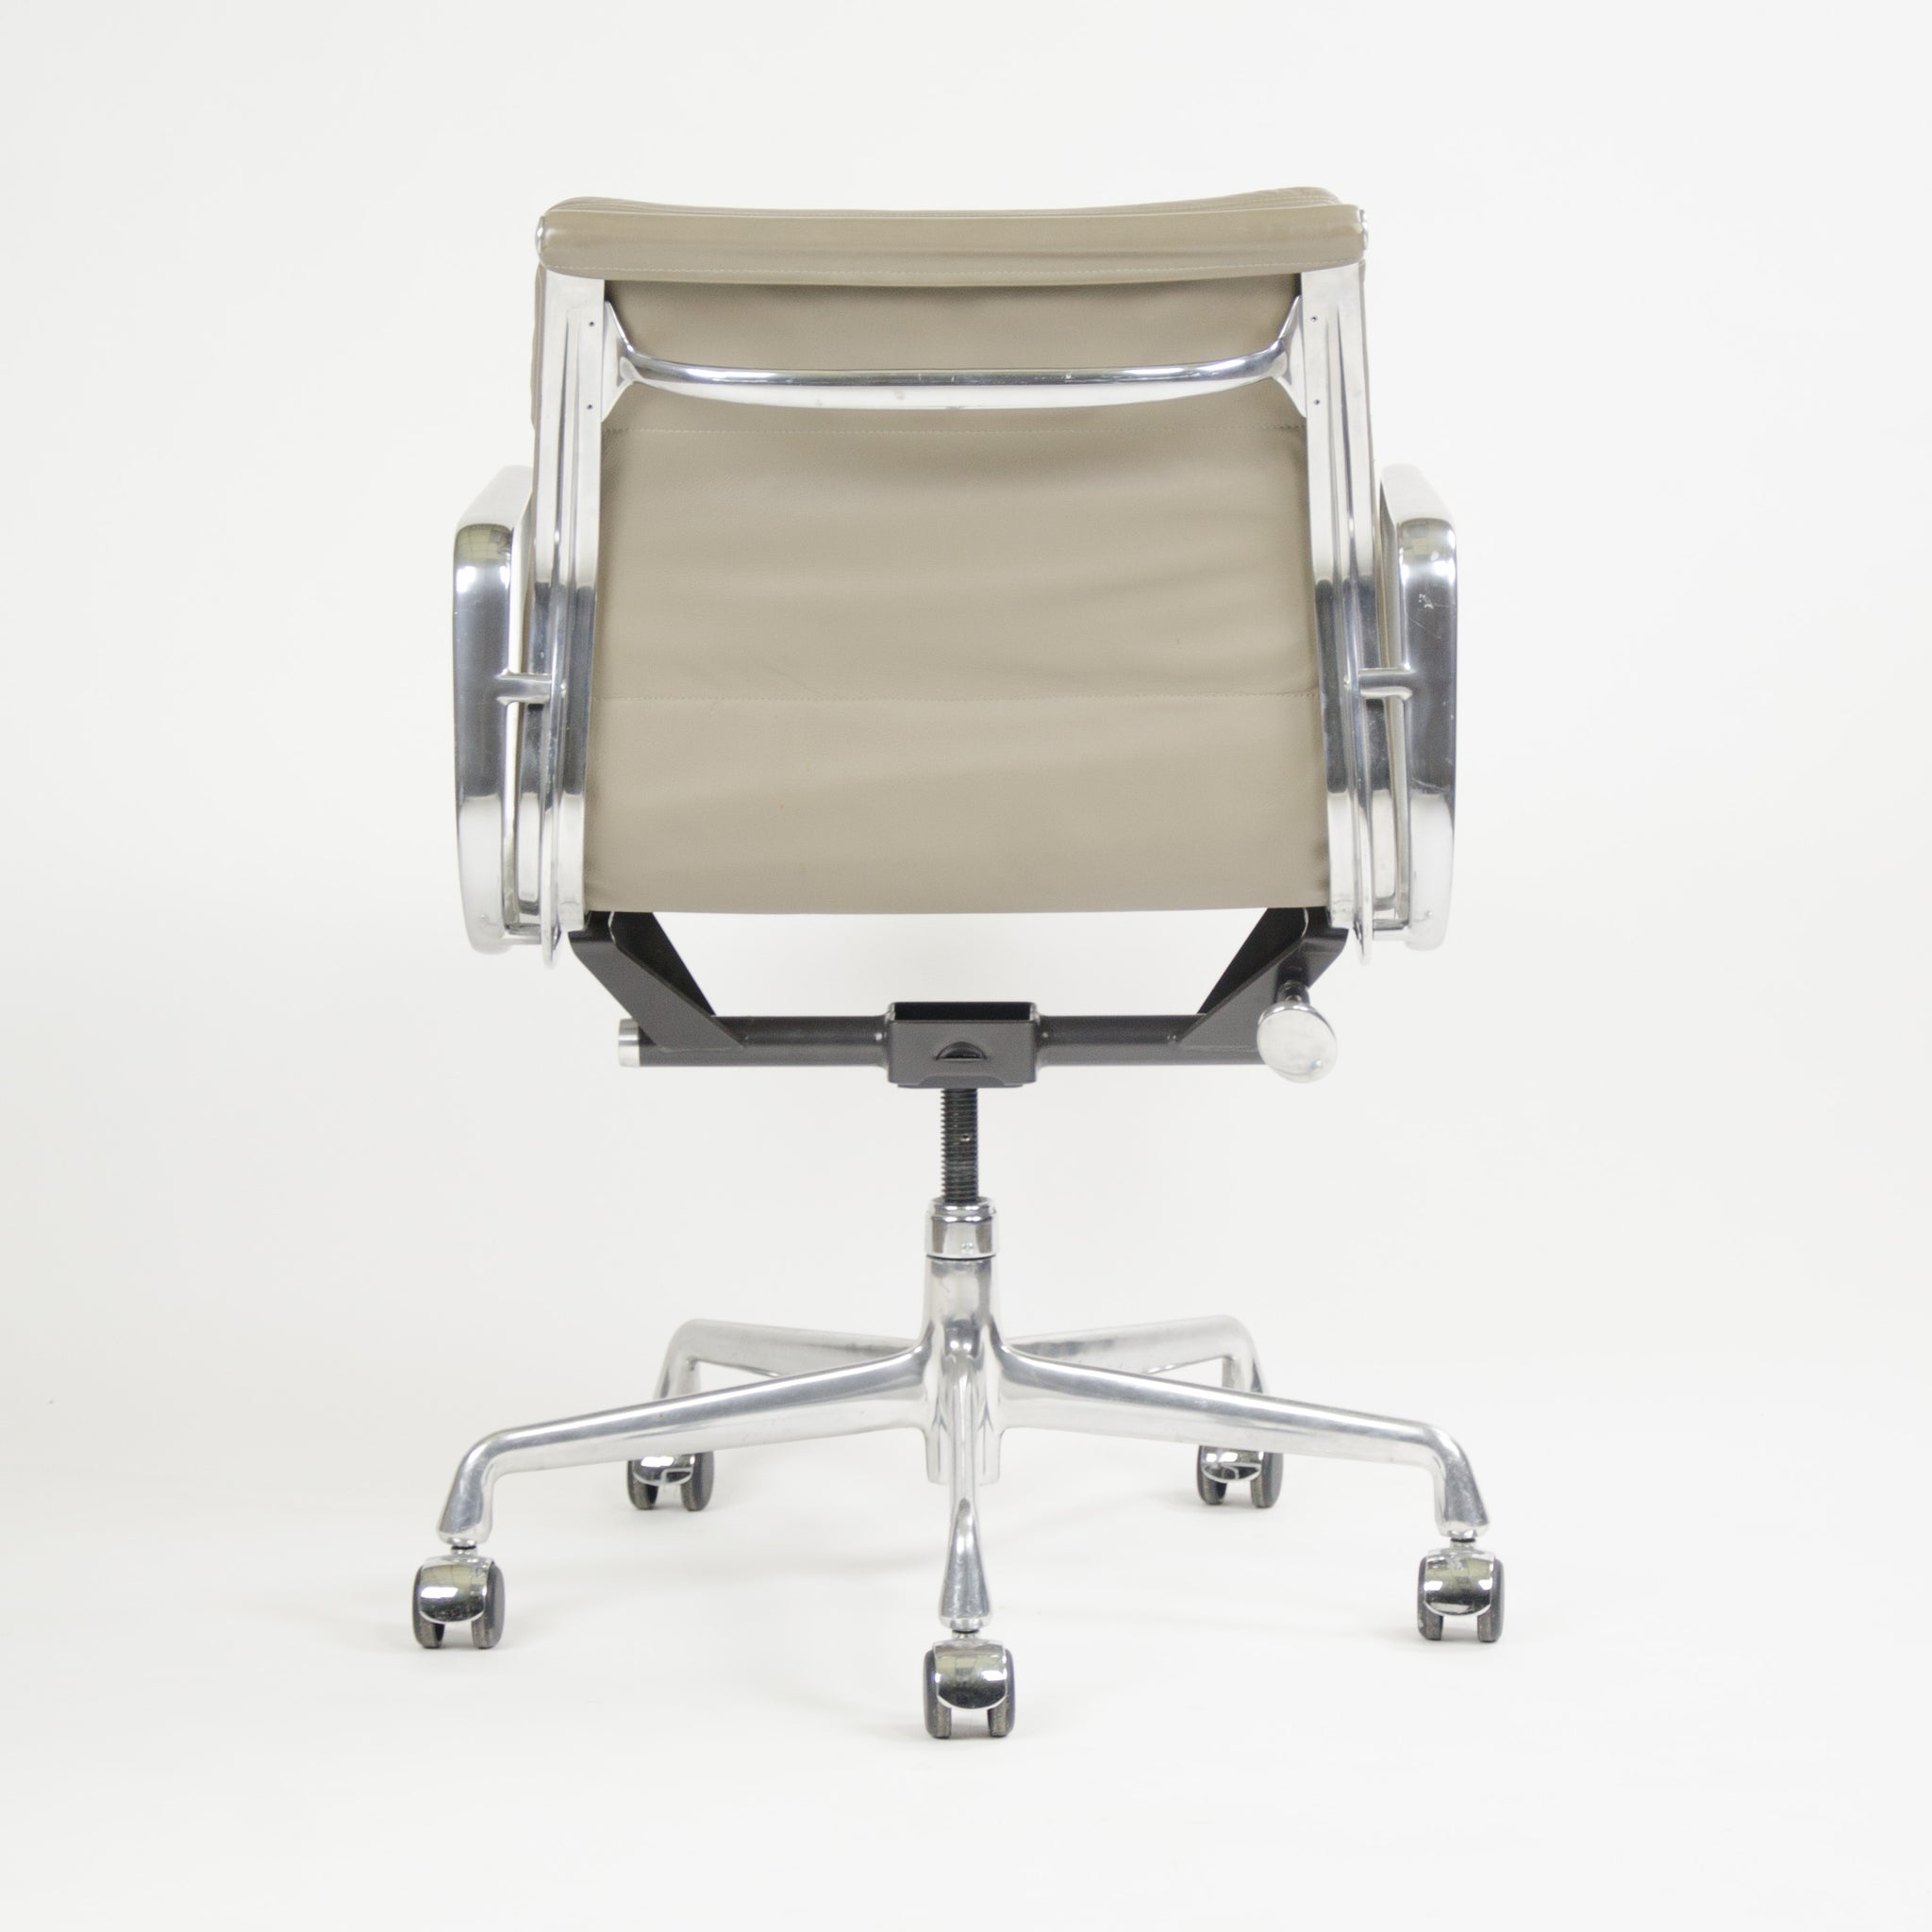 SOLD Herman Miller Eames Soft Pad Aluminum Group Chair Dark Tan Leather 2007